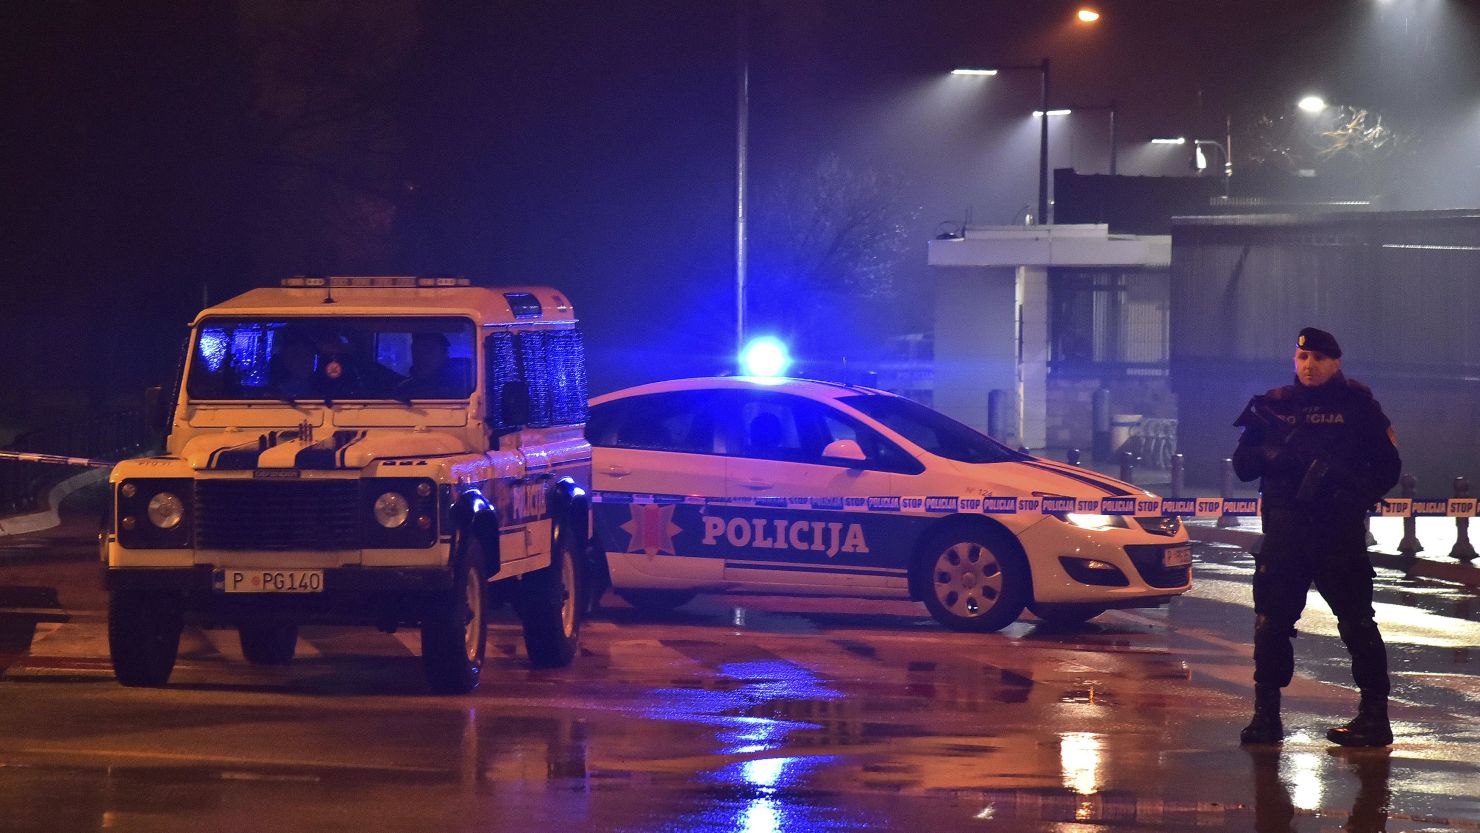 Police block off the area around the US Embassy in Montenegro's capital of Podgorica early Thursday.